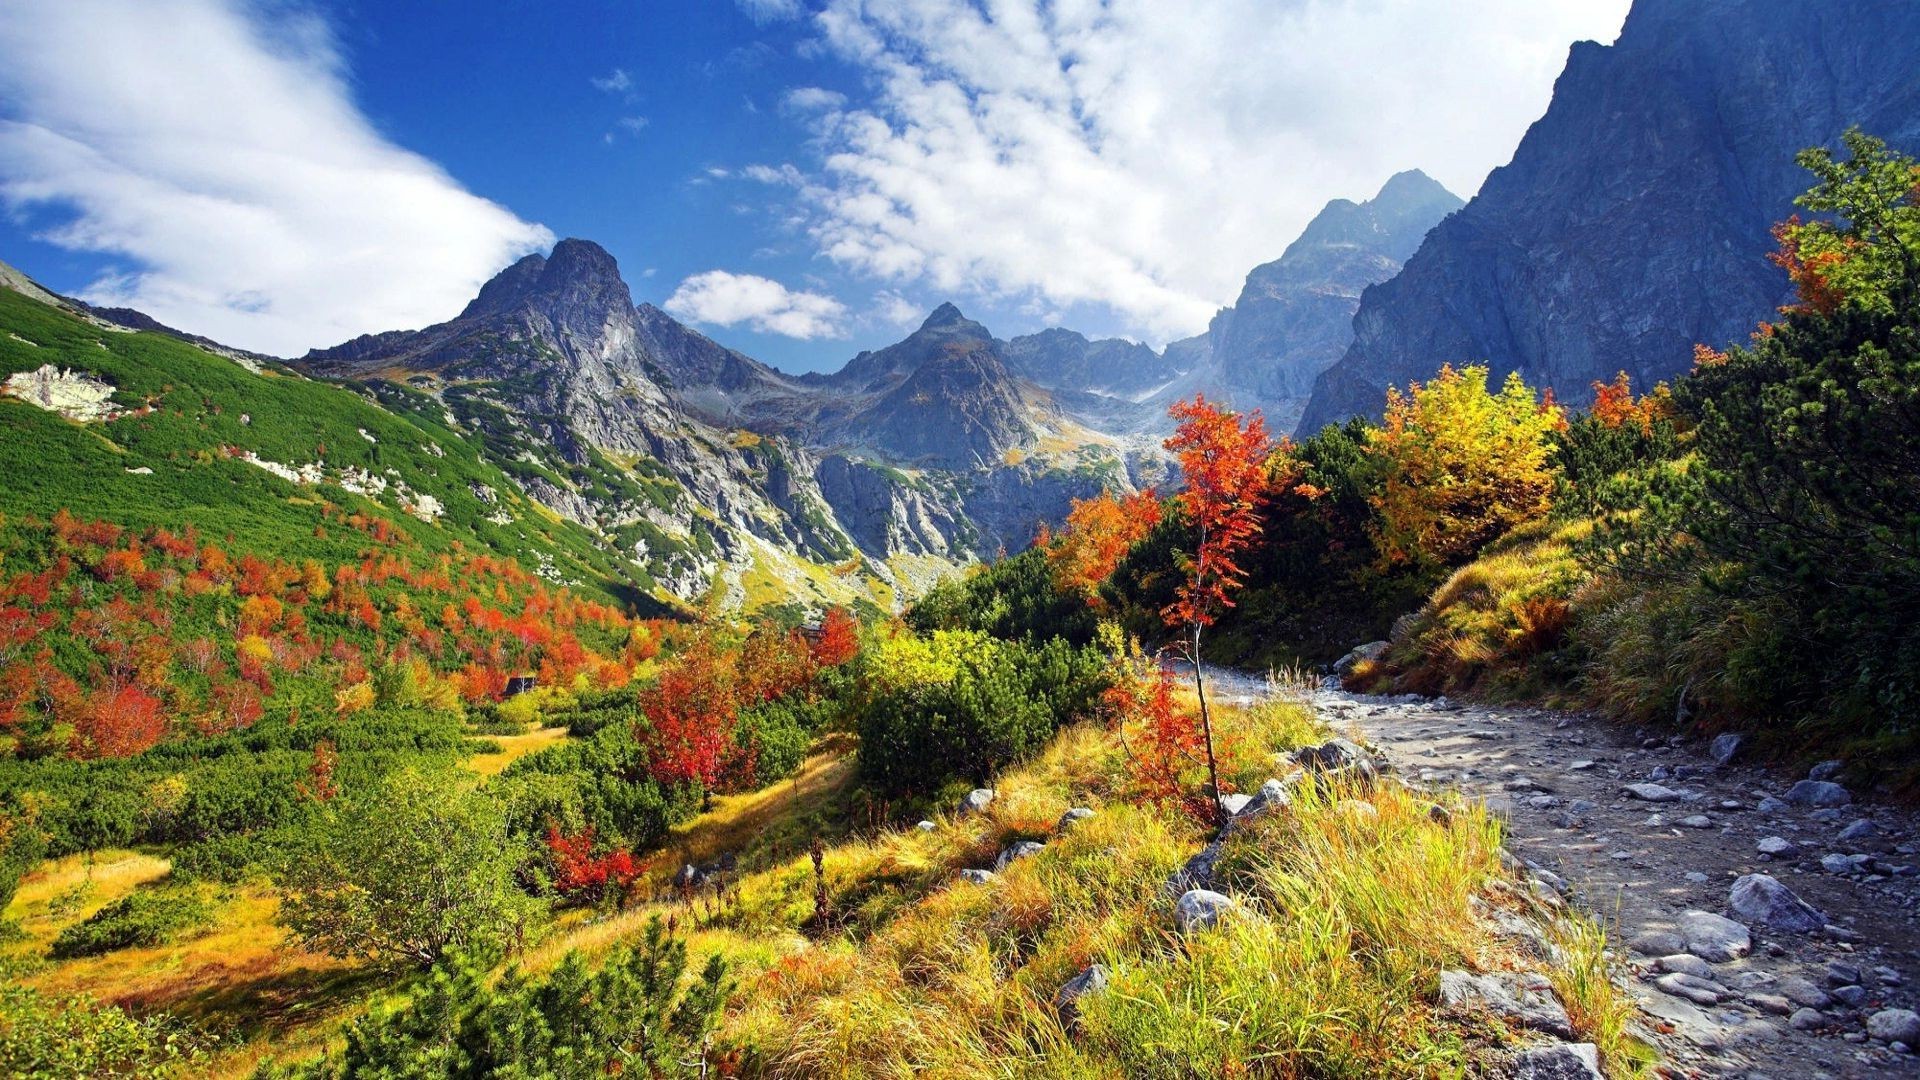 Enter the colorful country under the Tatras | mushroom magazine